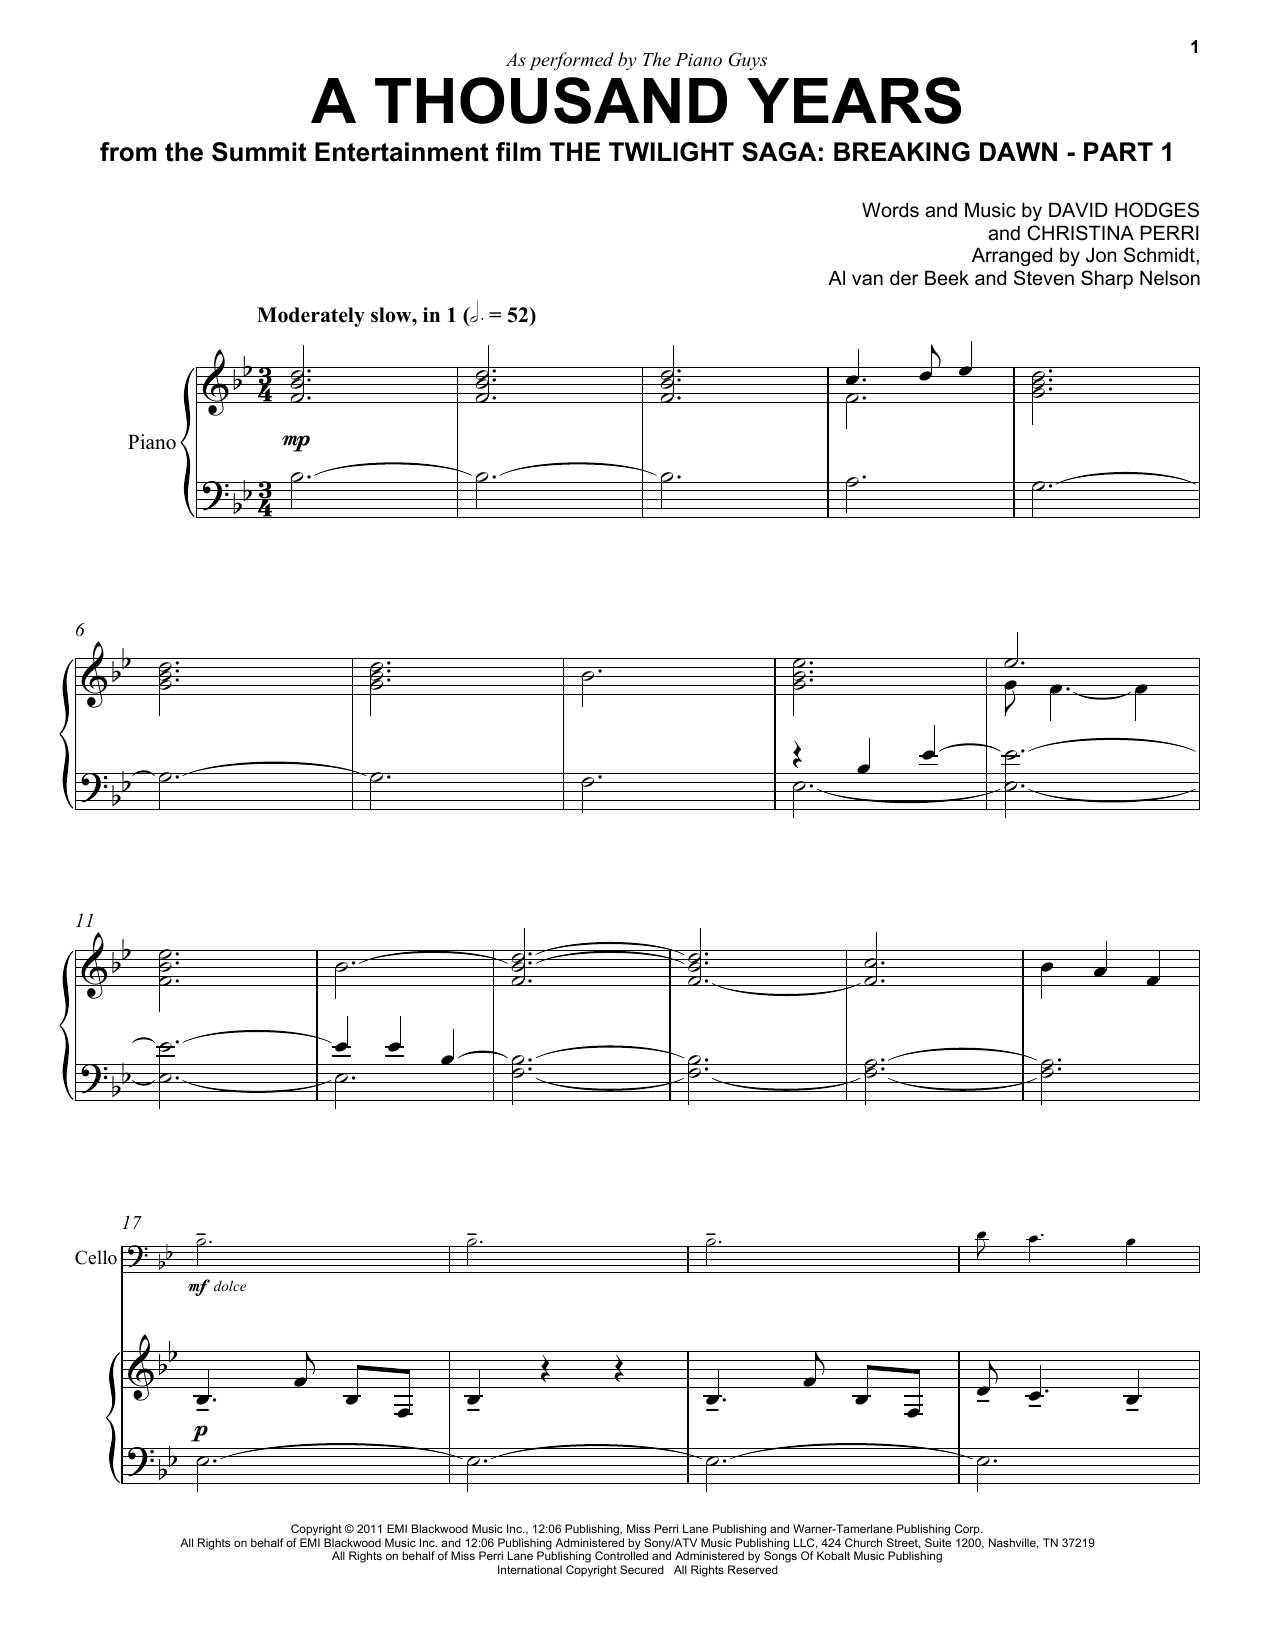 Download The Piano Guys A Thousand Years Sheet Music